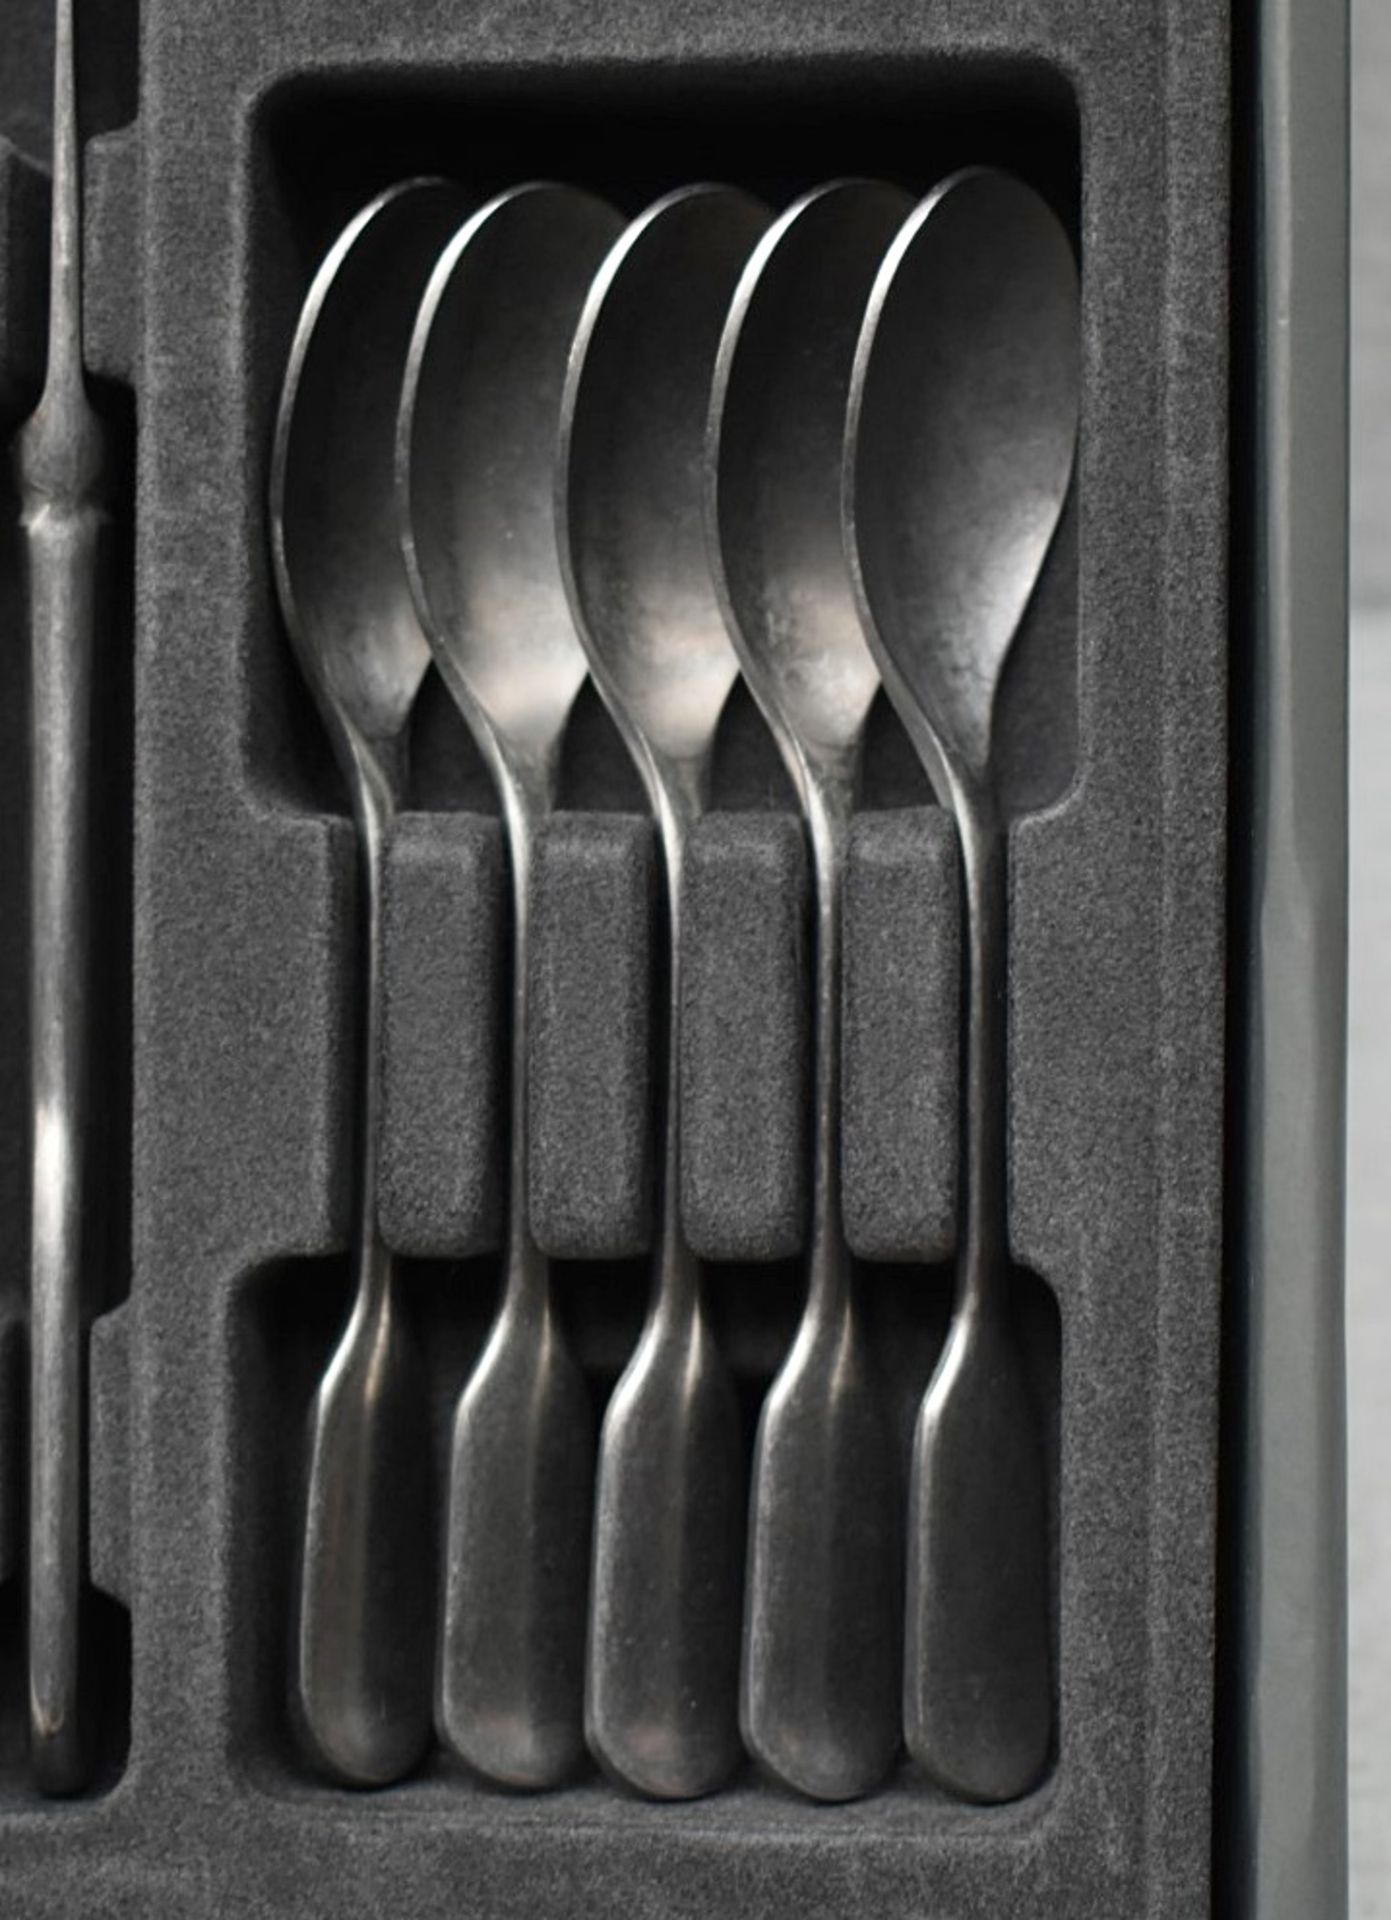 1 x CHARINGWORTH 'Fiddle' Luxury Vintage-style 42-Piece Cutlery Set - Original Price £370.00 - Boxed - Image 9 of 11